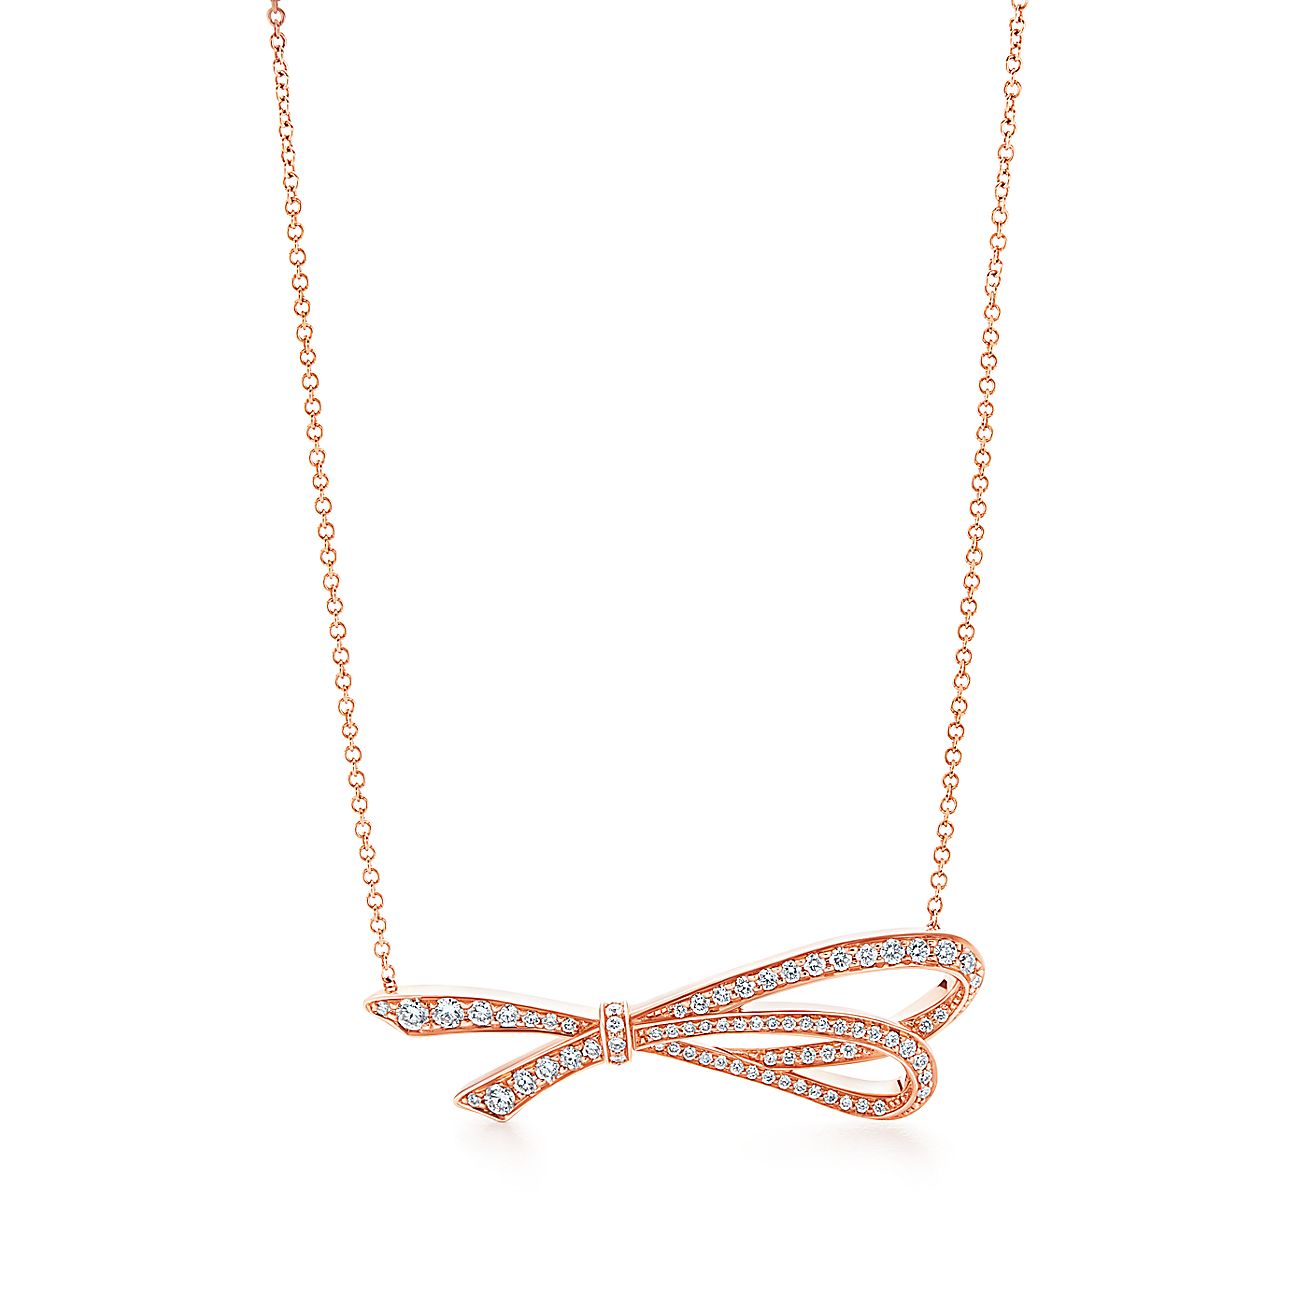 Tiffany Bow pendant in 18k rose gold with diamonds. | Tiffany & Co.